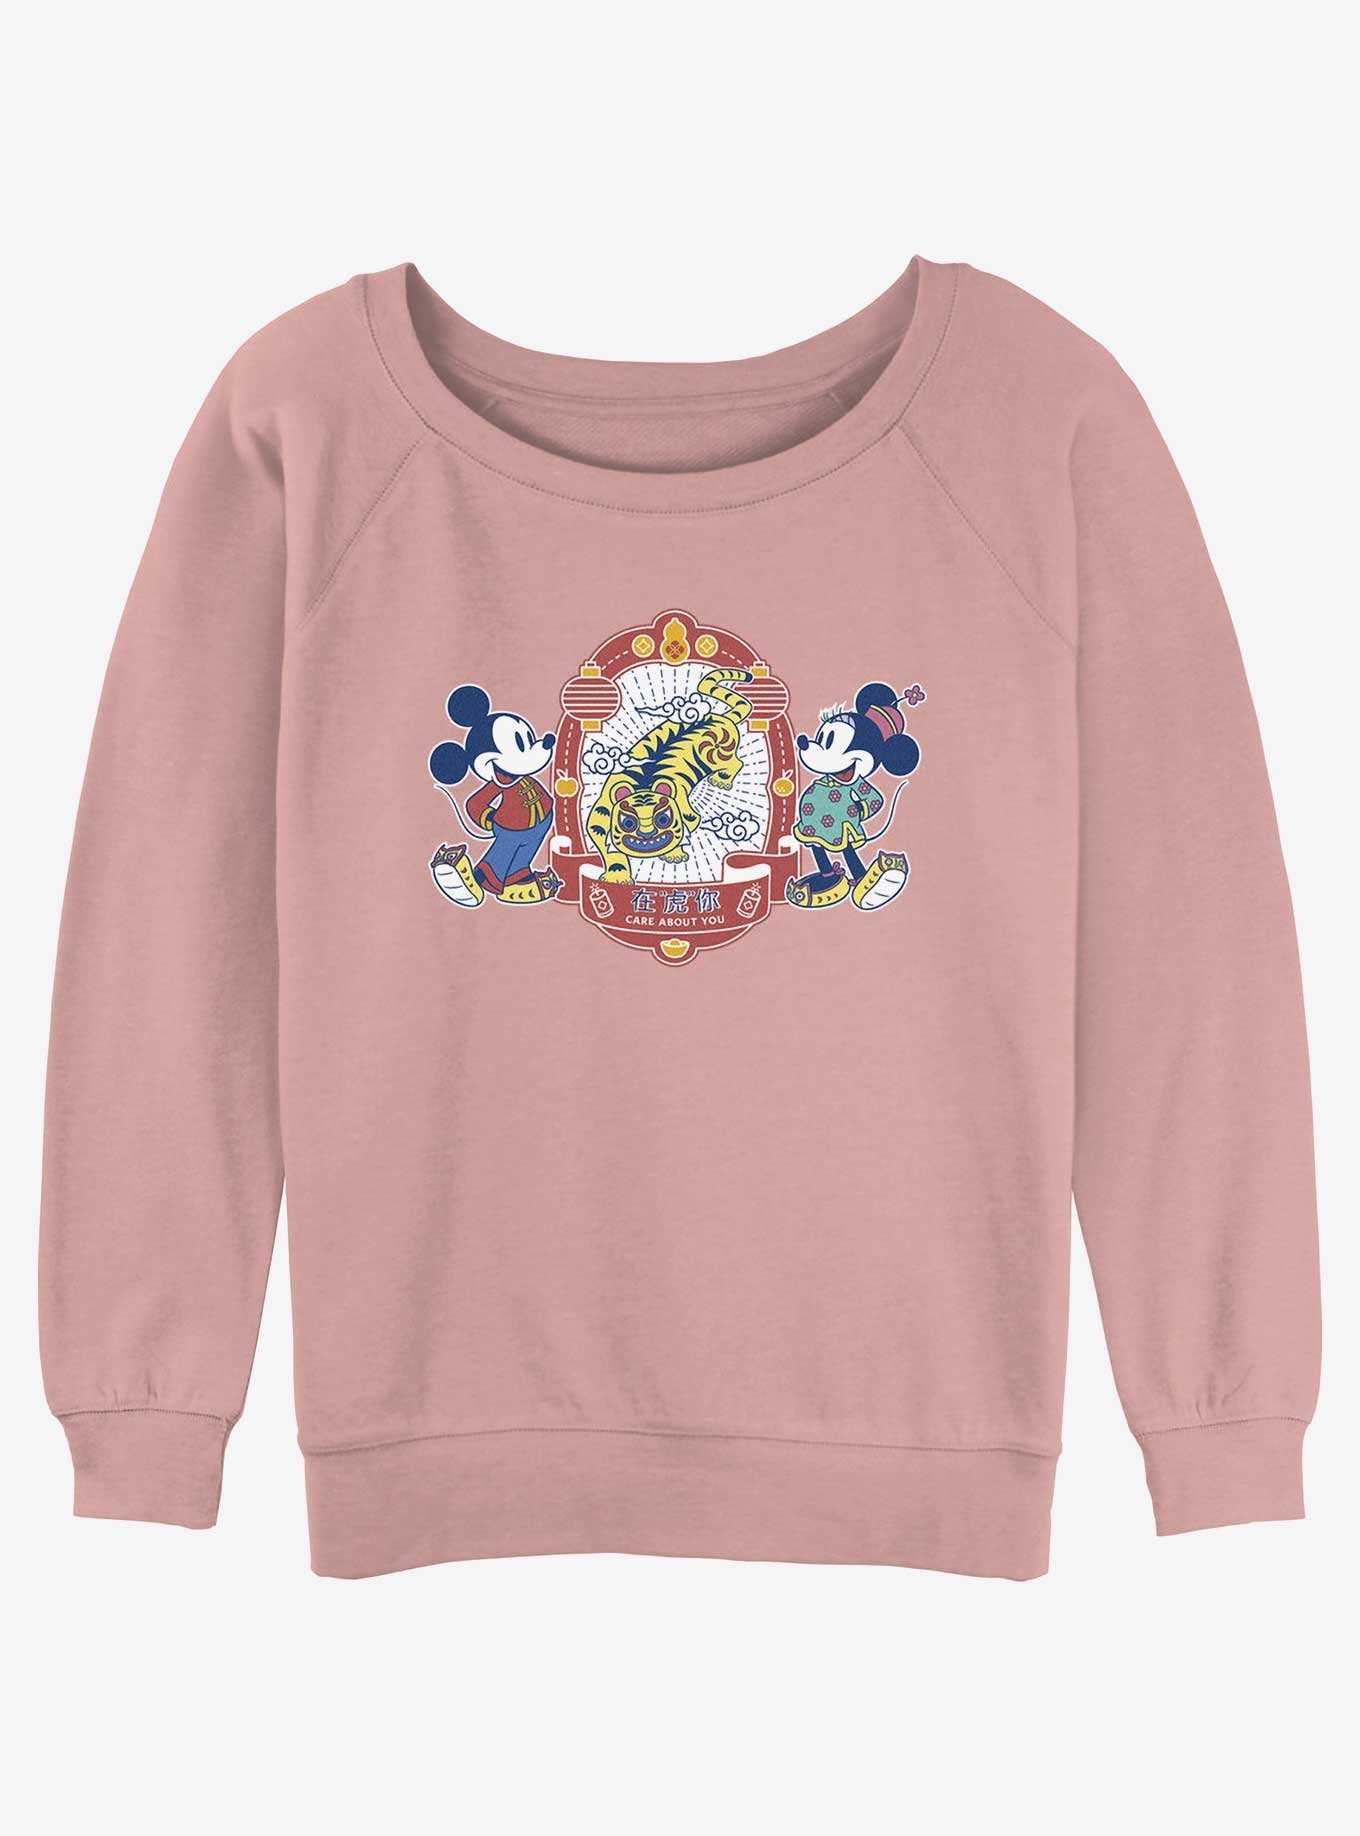 Disney Mickey Mouse Care About You Womens Slouchy Sweatshirt, , hi-res